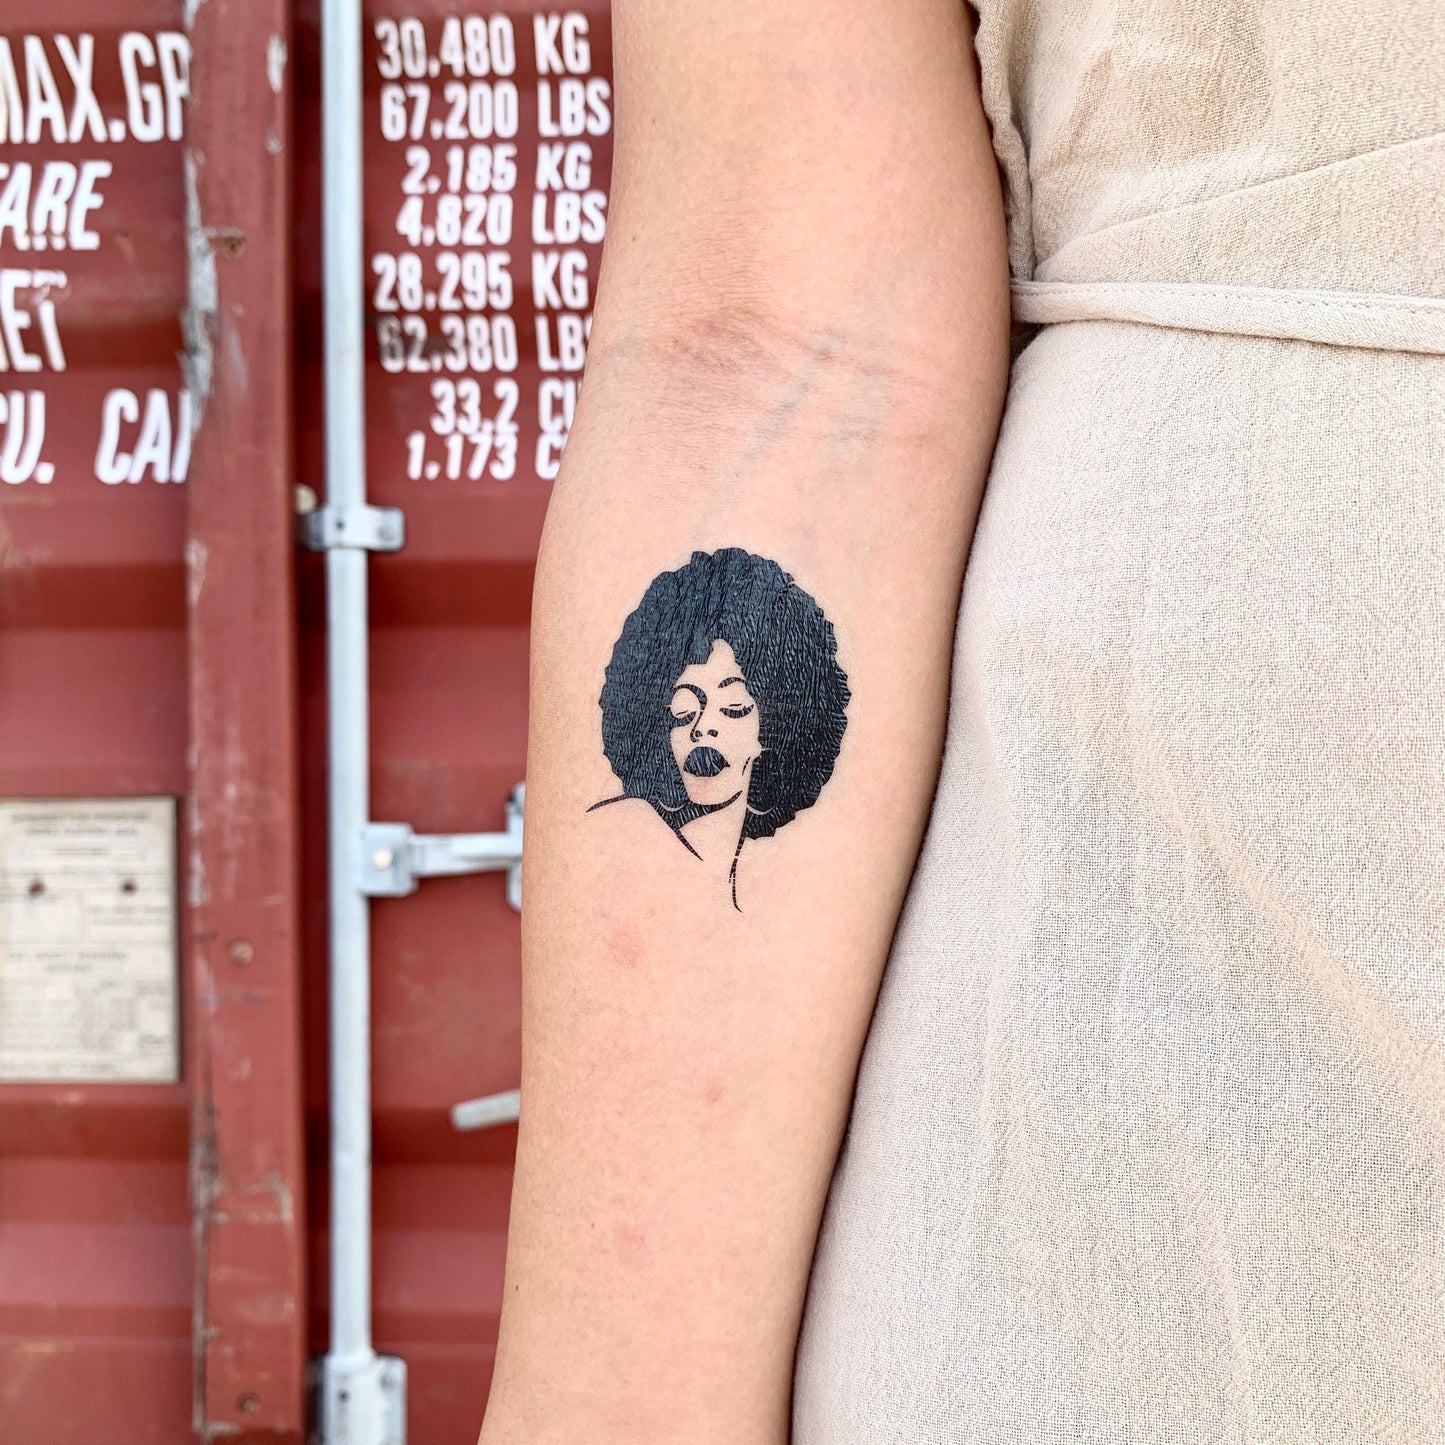 fake small afro afrocentric black lives matter woman skin lady people portrait temporary tattoo sticker design idea on inner arm